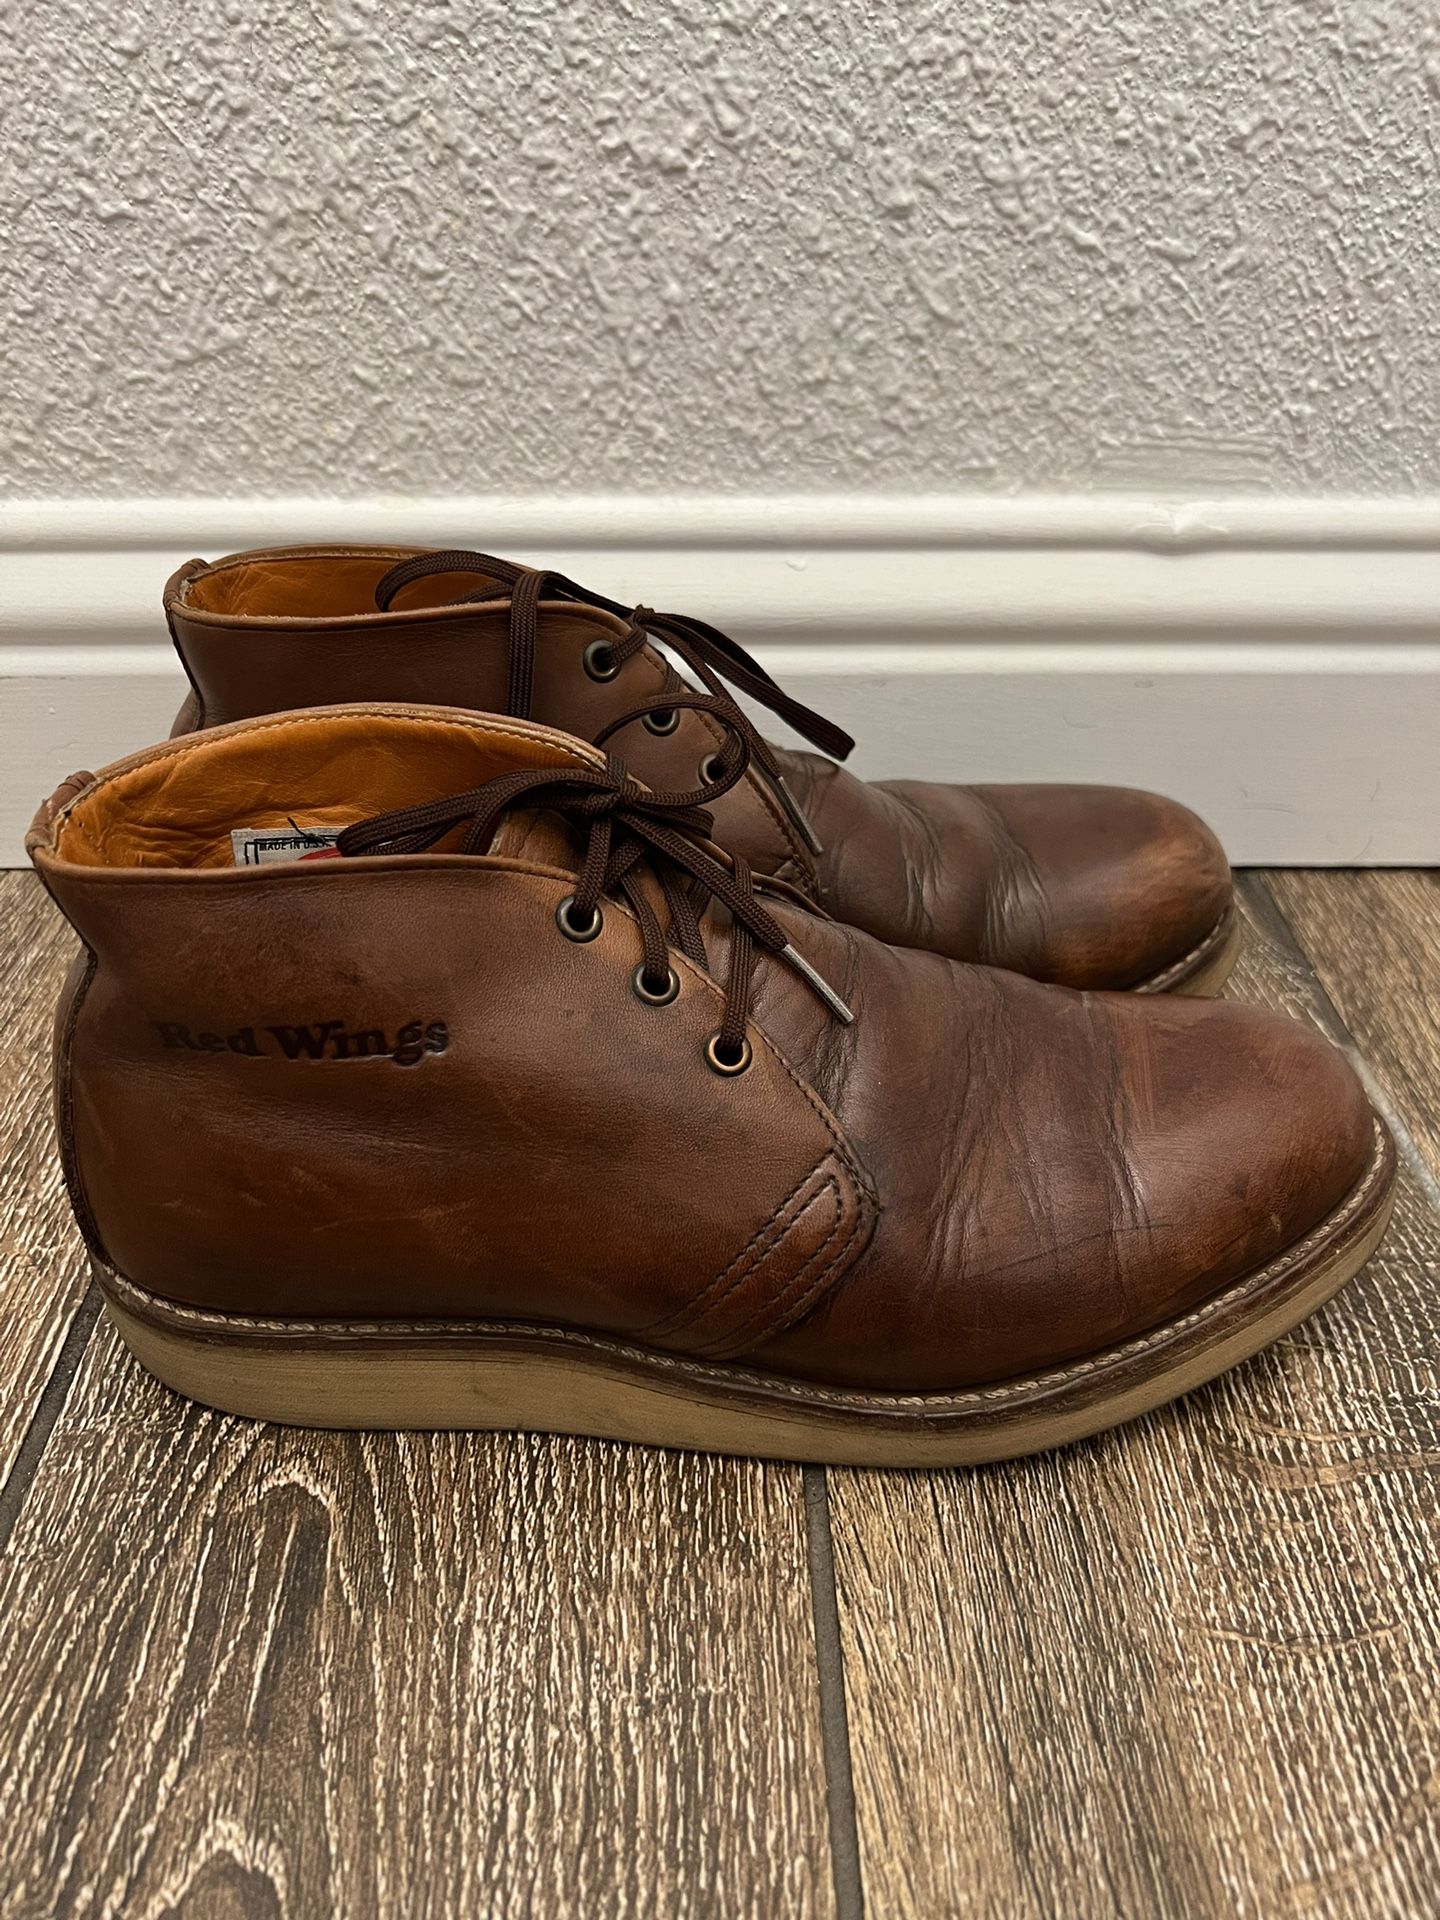 Red Wing 595 Heritage Chukka Work Boots Brown Made In USA sz 6.5